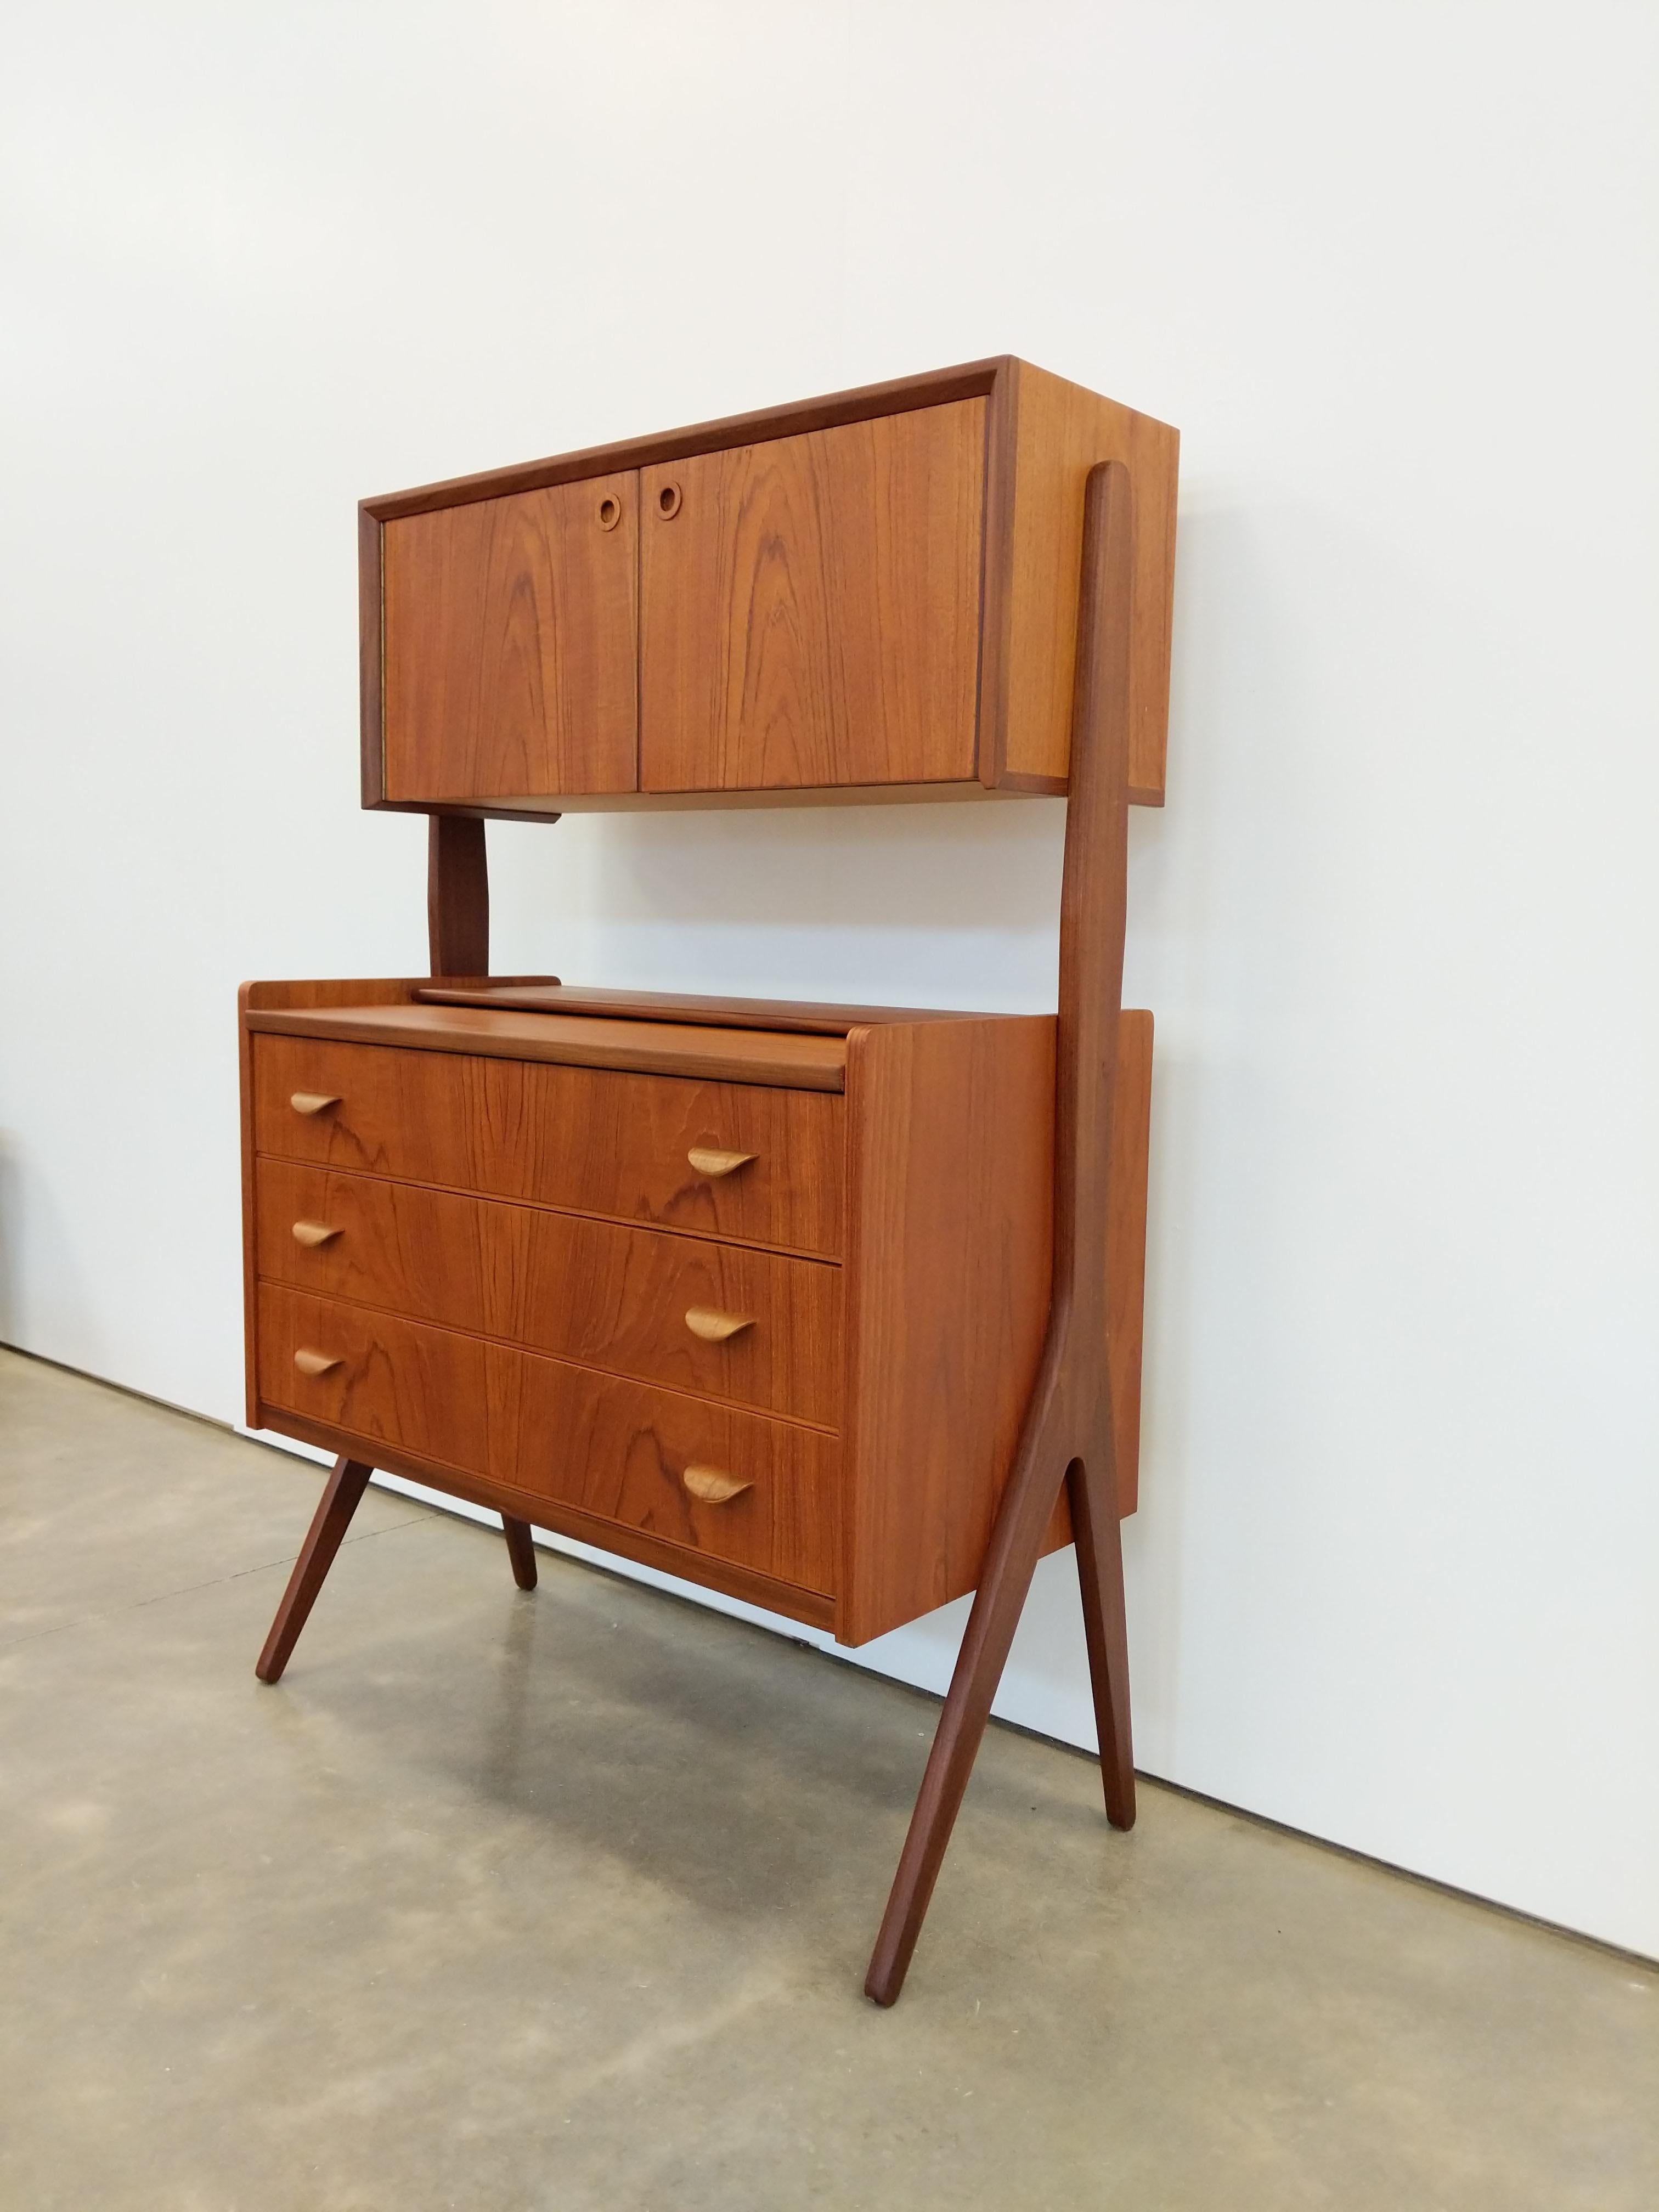 Authentic vintage mid century Danish / Scandinavian Modern teak secretary desk / vanity with mirror / dresser / chest of drawers / cabinet.

This piece is in excellent refinished condition with very few signs of age-related wear (see photos).

If